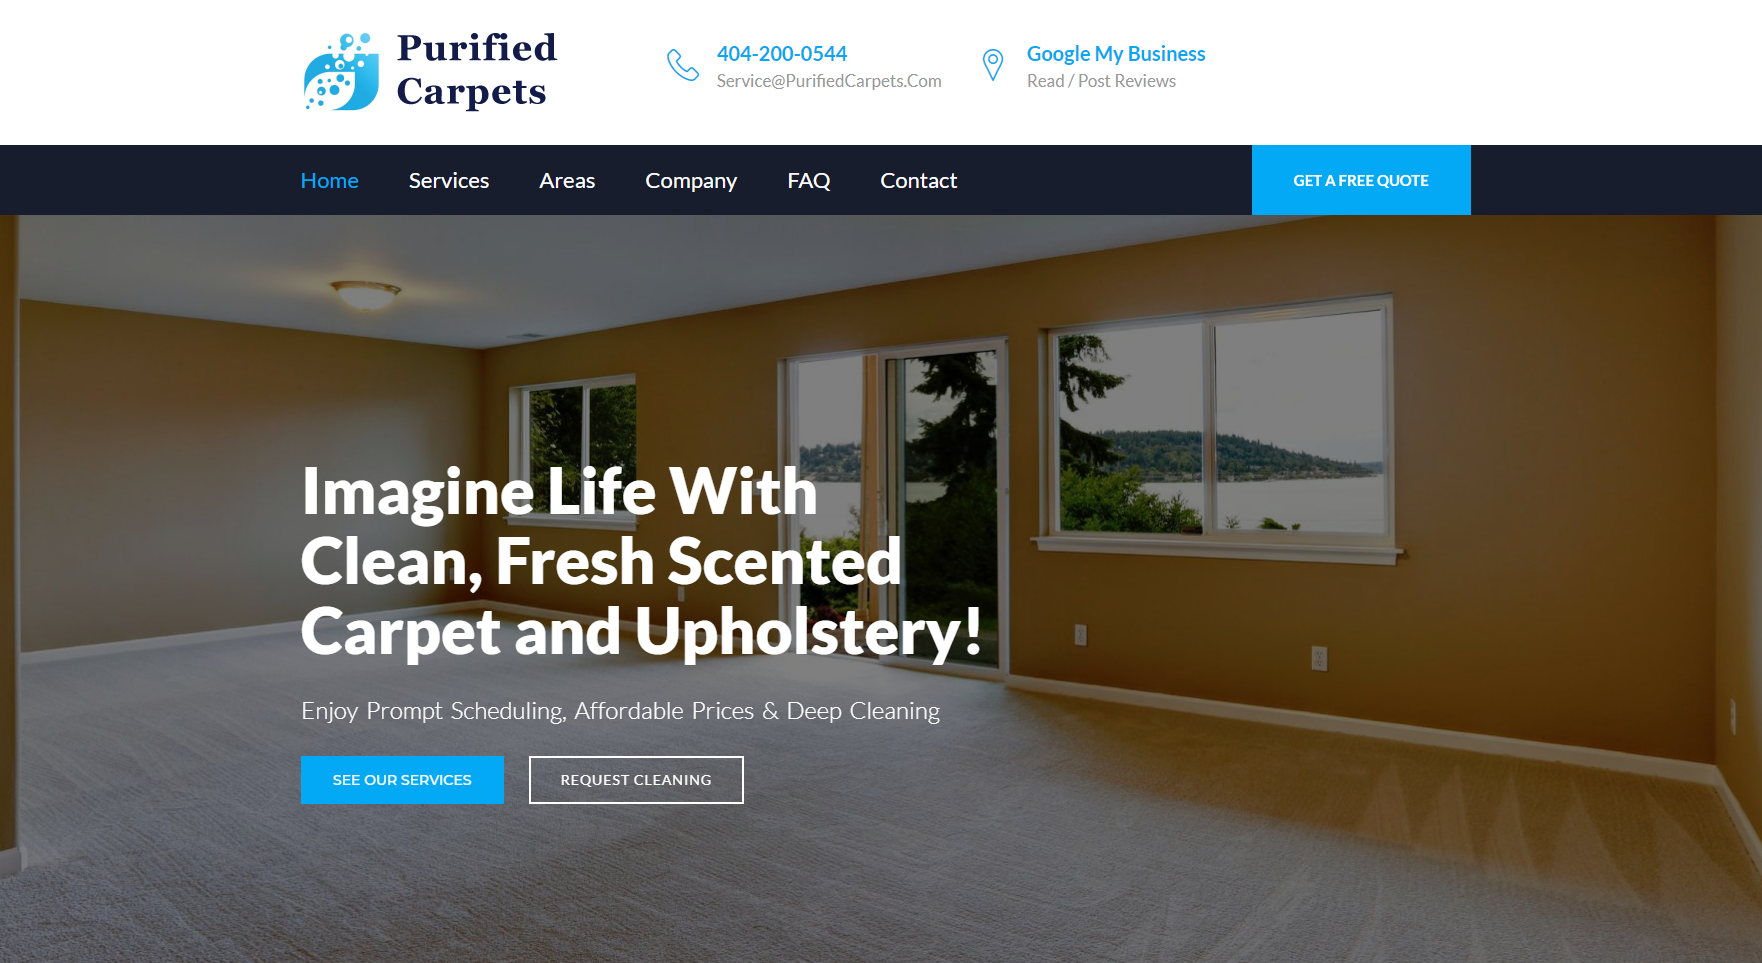 Atlanta Carpet Cleaning Company Purified Carpets Announces Launch Of New Website